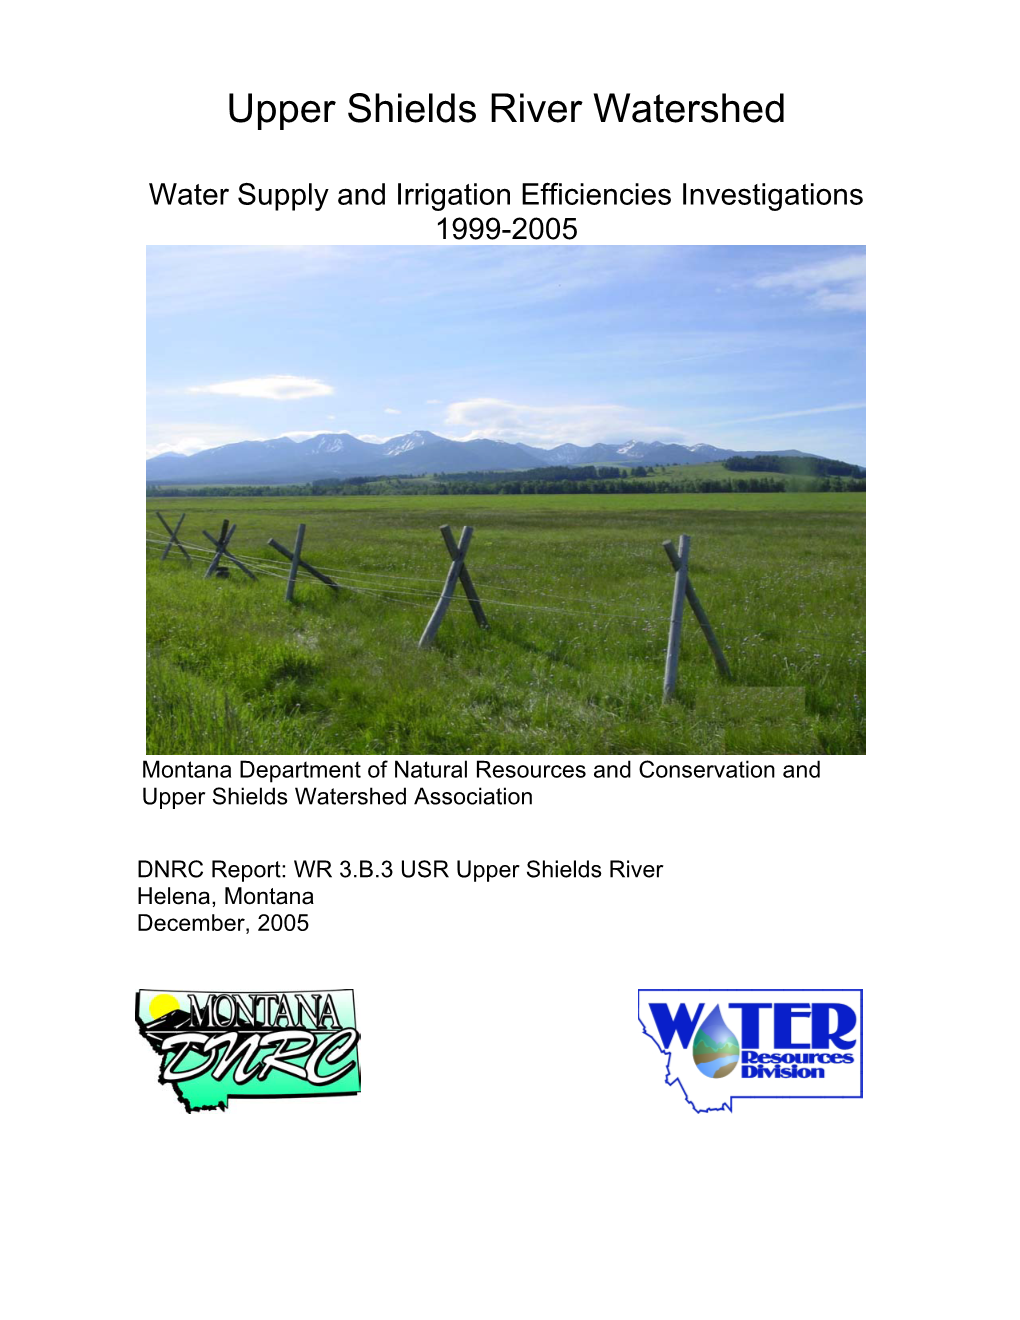 Upper Shields River Watershed Water Supply and Irrigation Efficiencies Investigations